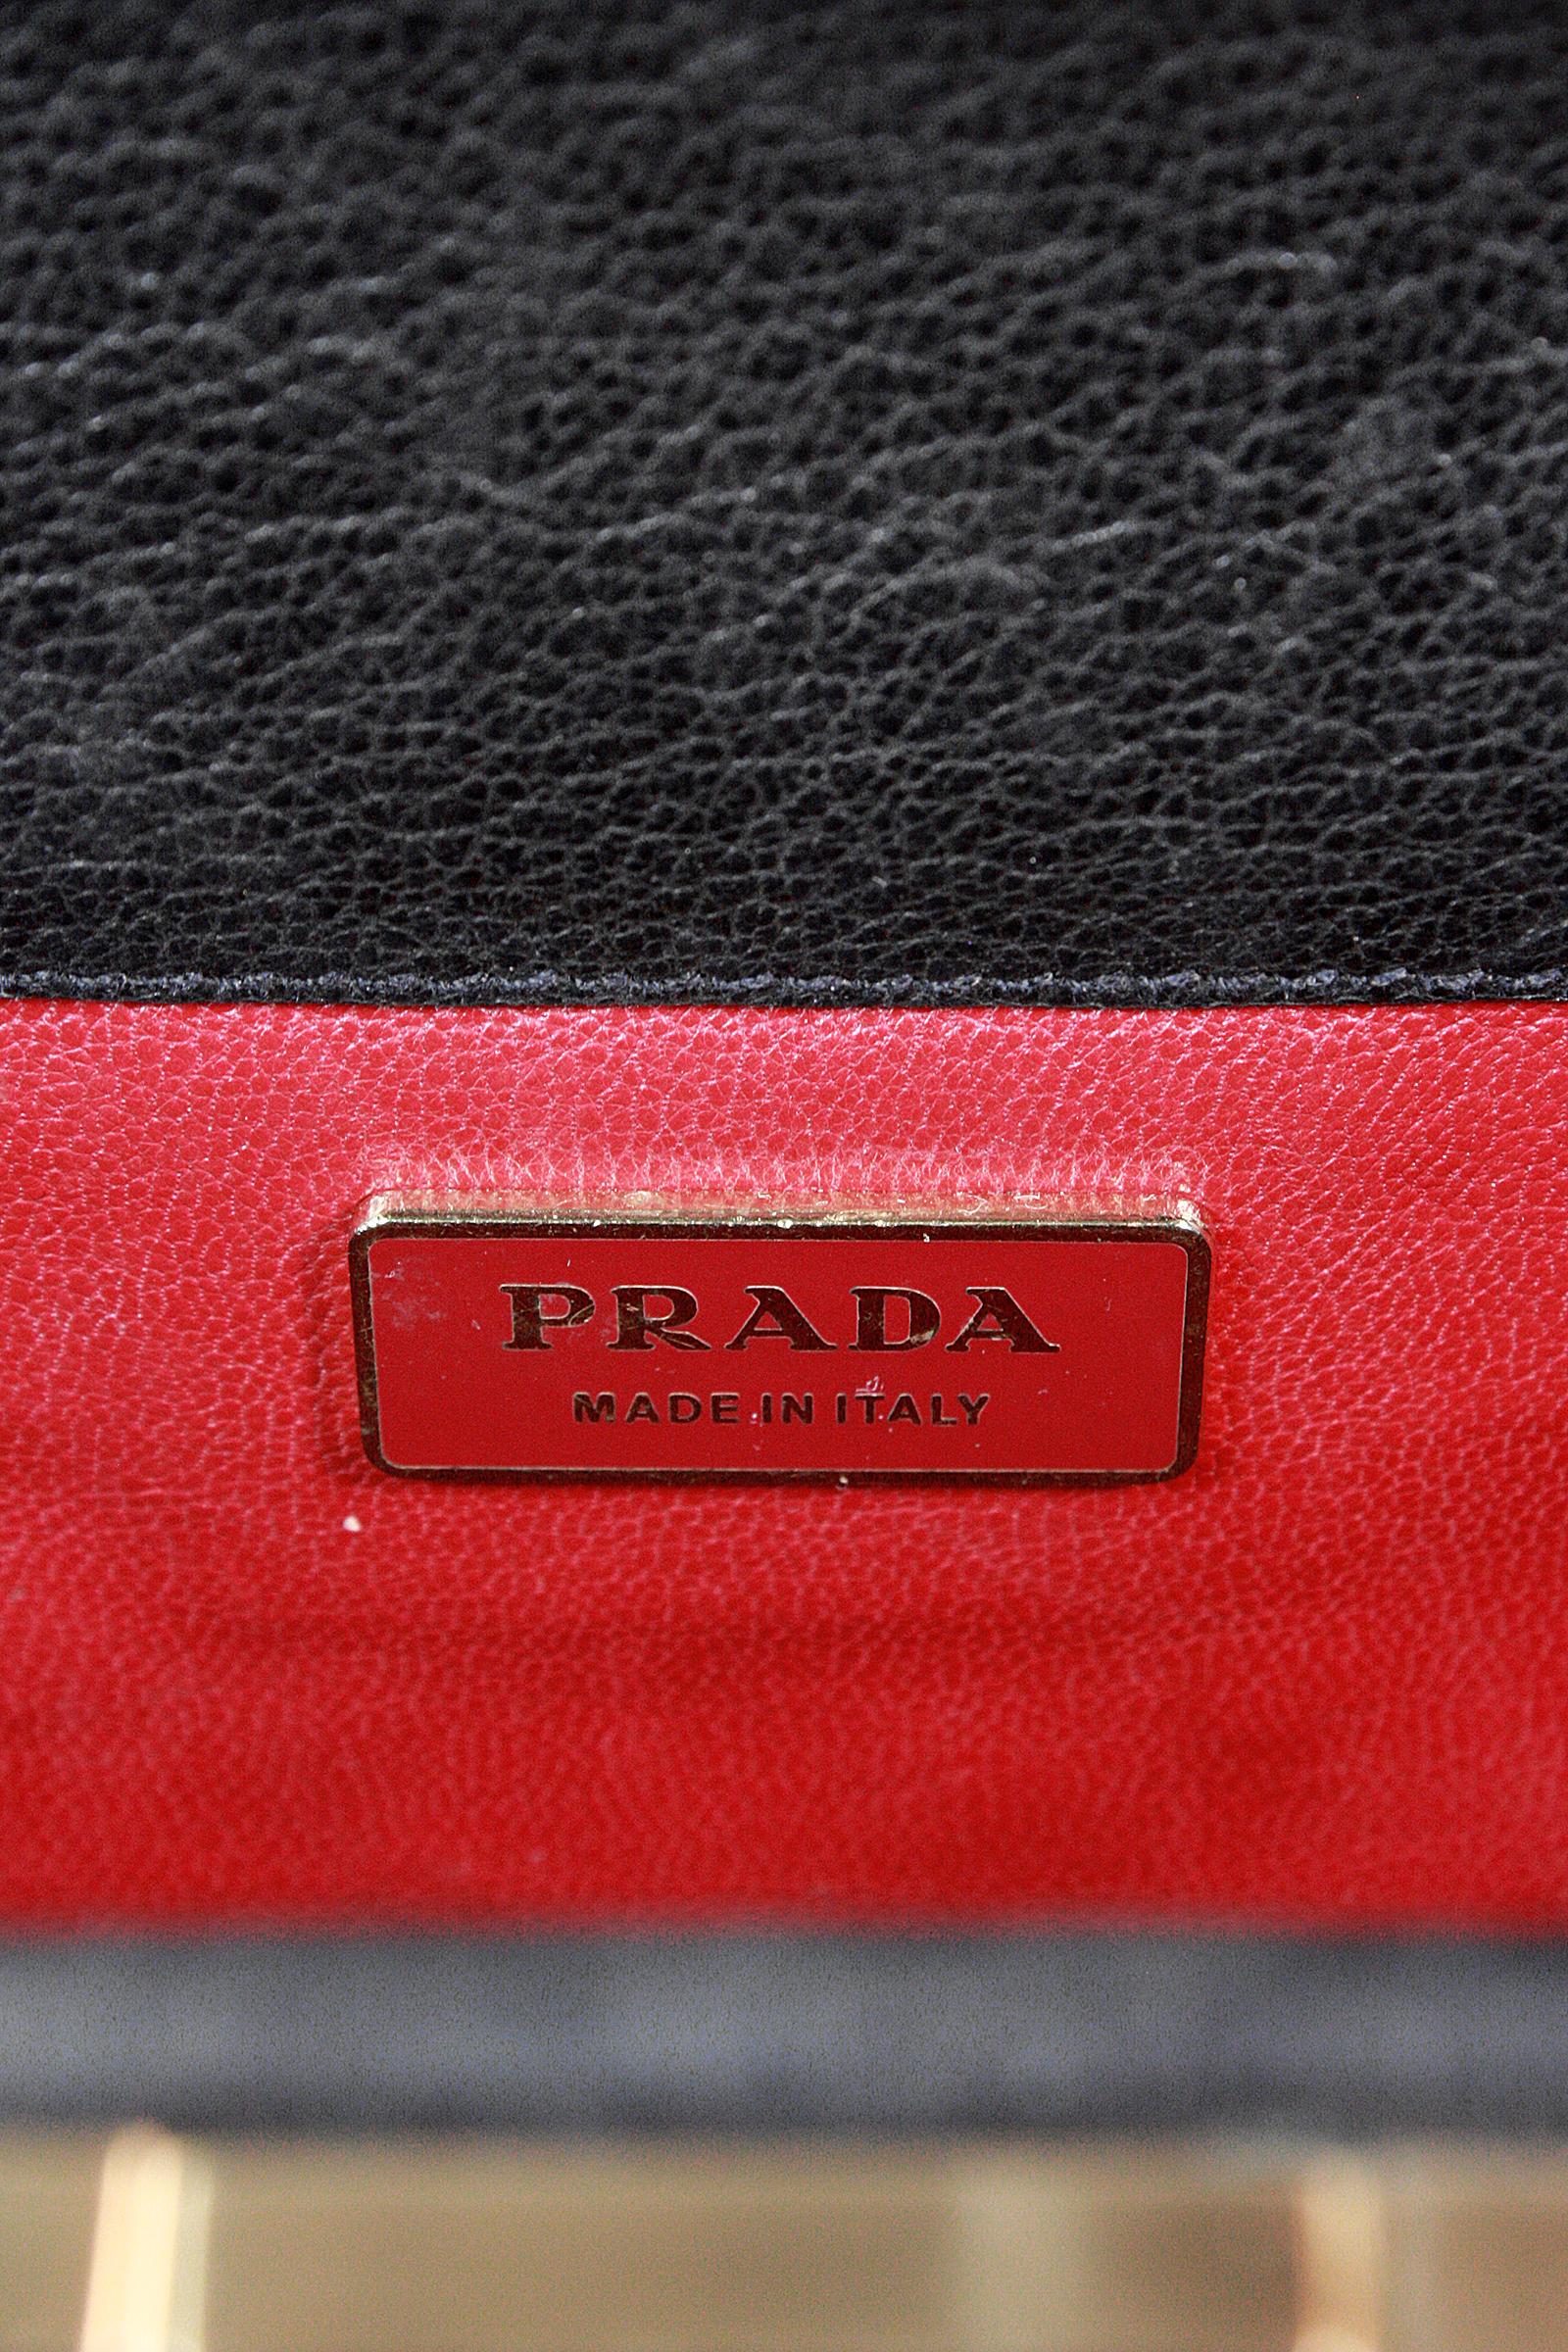 Prada Black Leather Purse with Gold Grommets 1